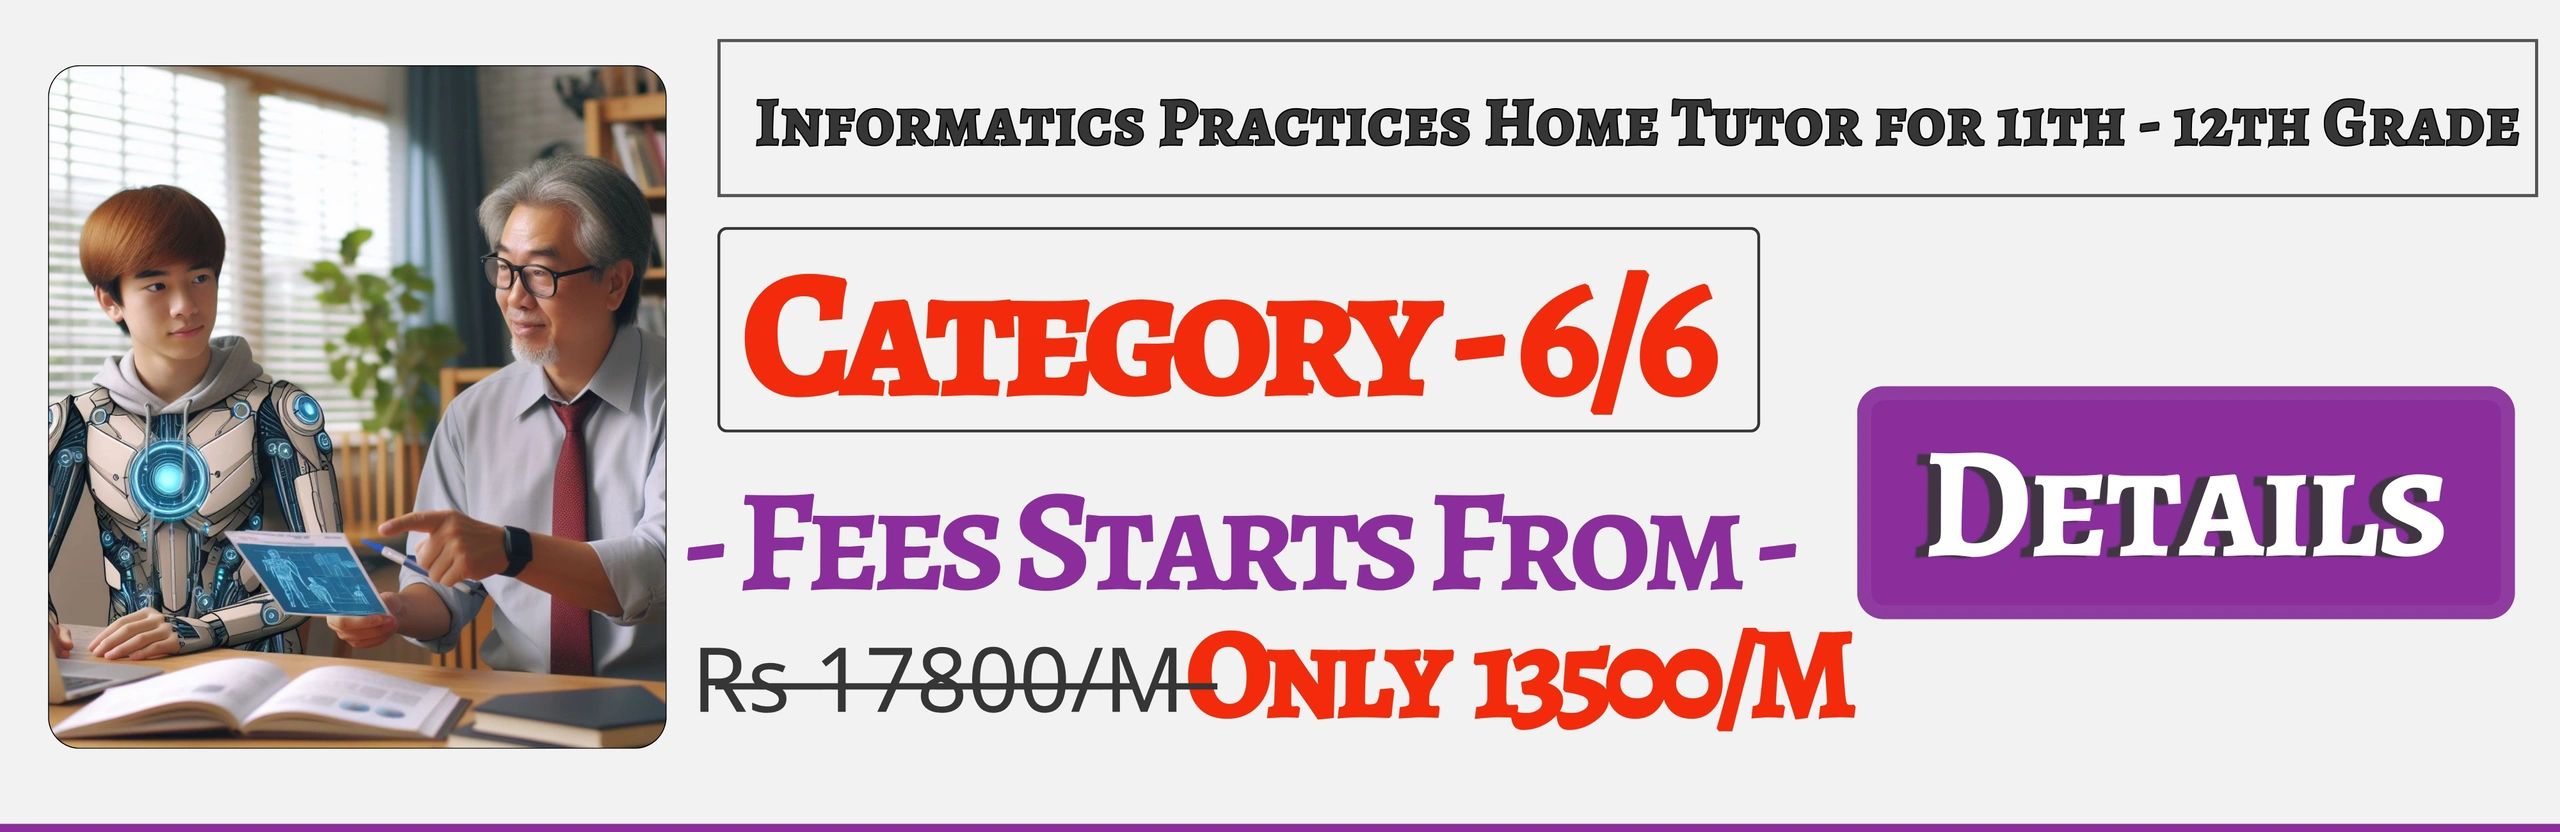 Book Best Nearby Informatics Practices Home Tuition Tutors For 11th & 12th Jaipur ,Fees Only 13500/M